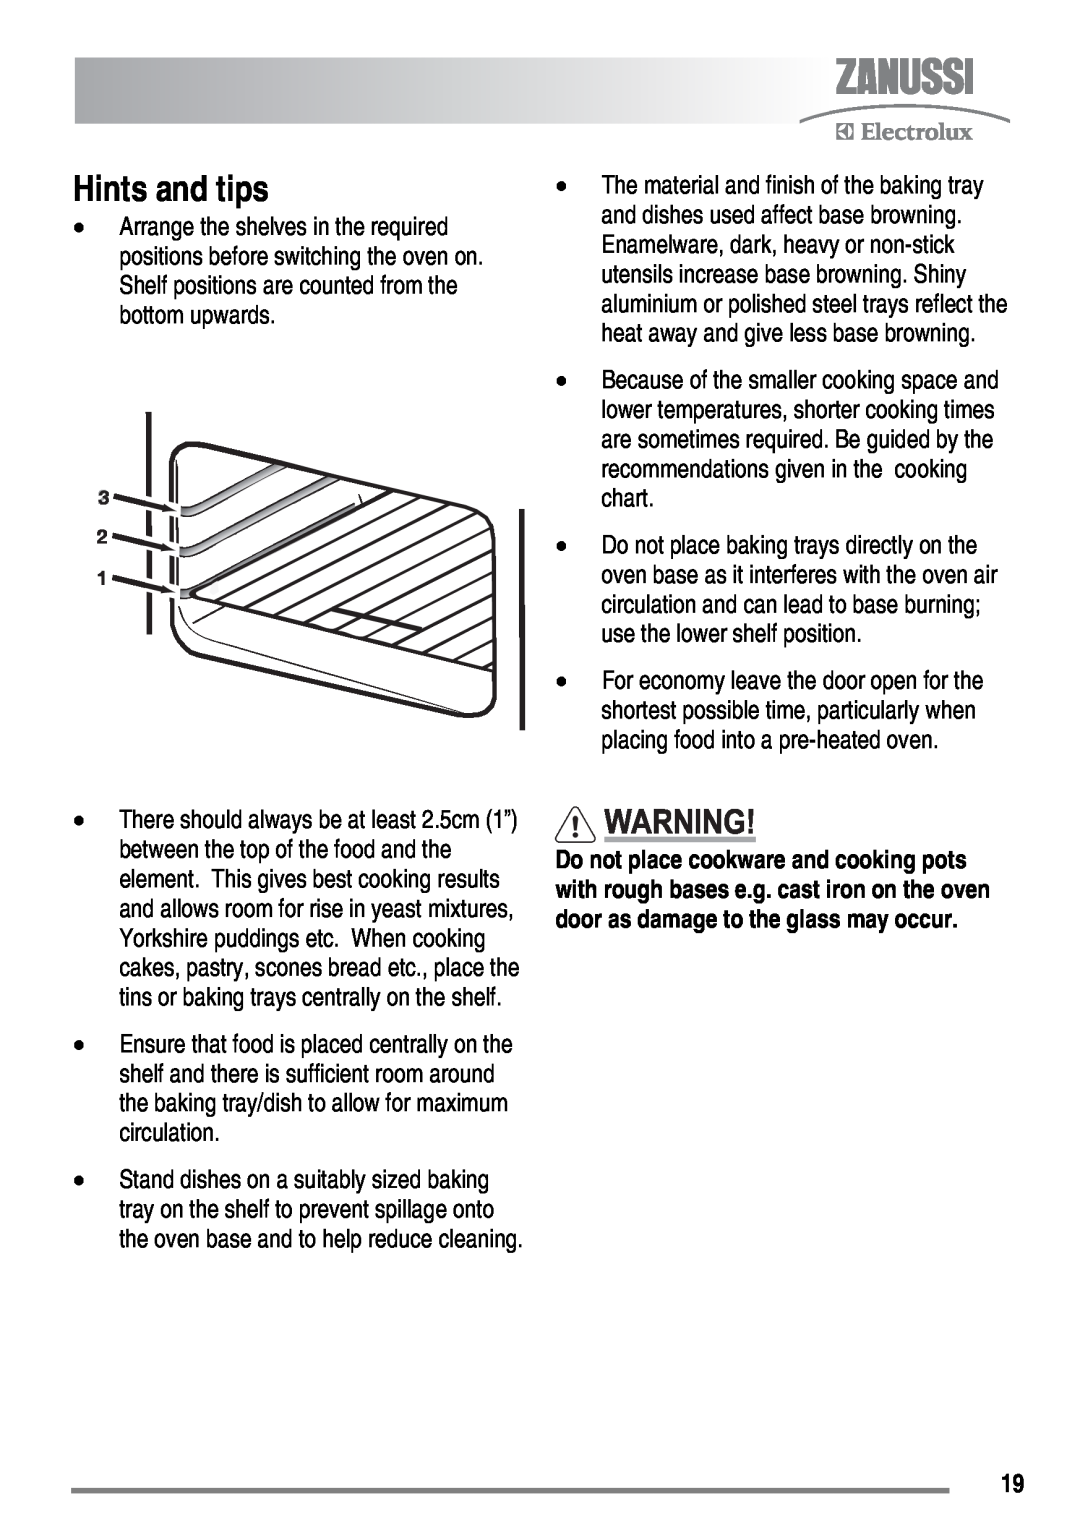 Zanussi ZKM6040 user manual Hints and tips 